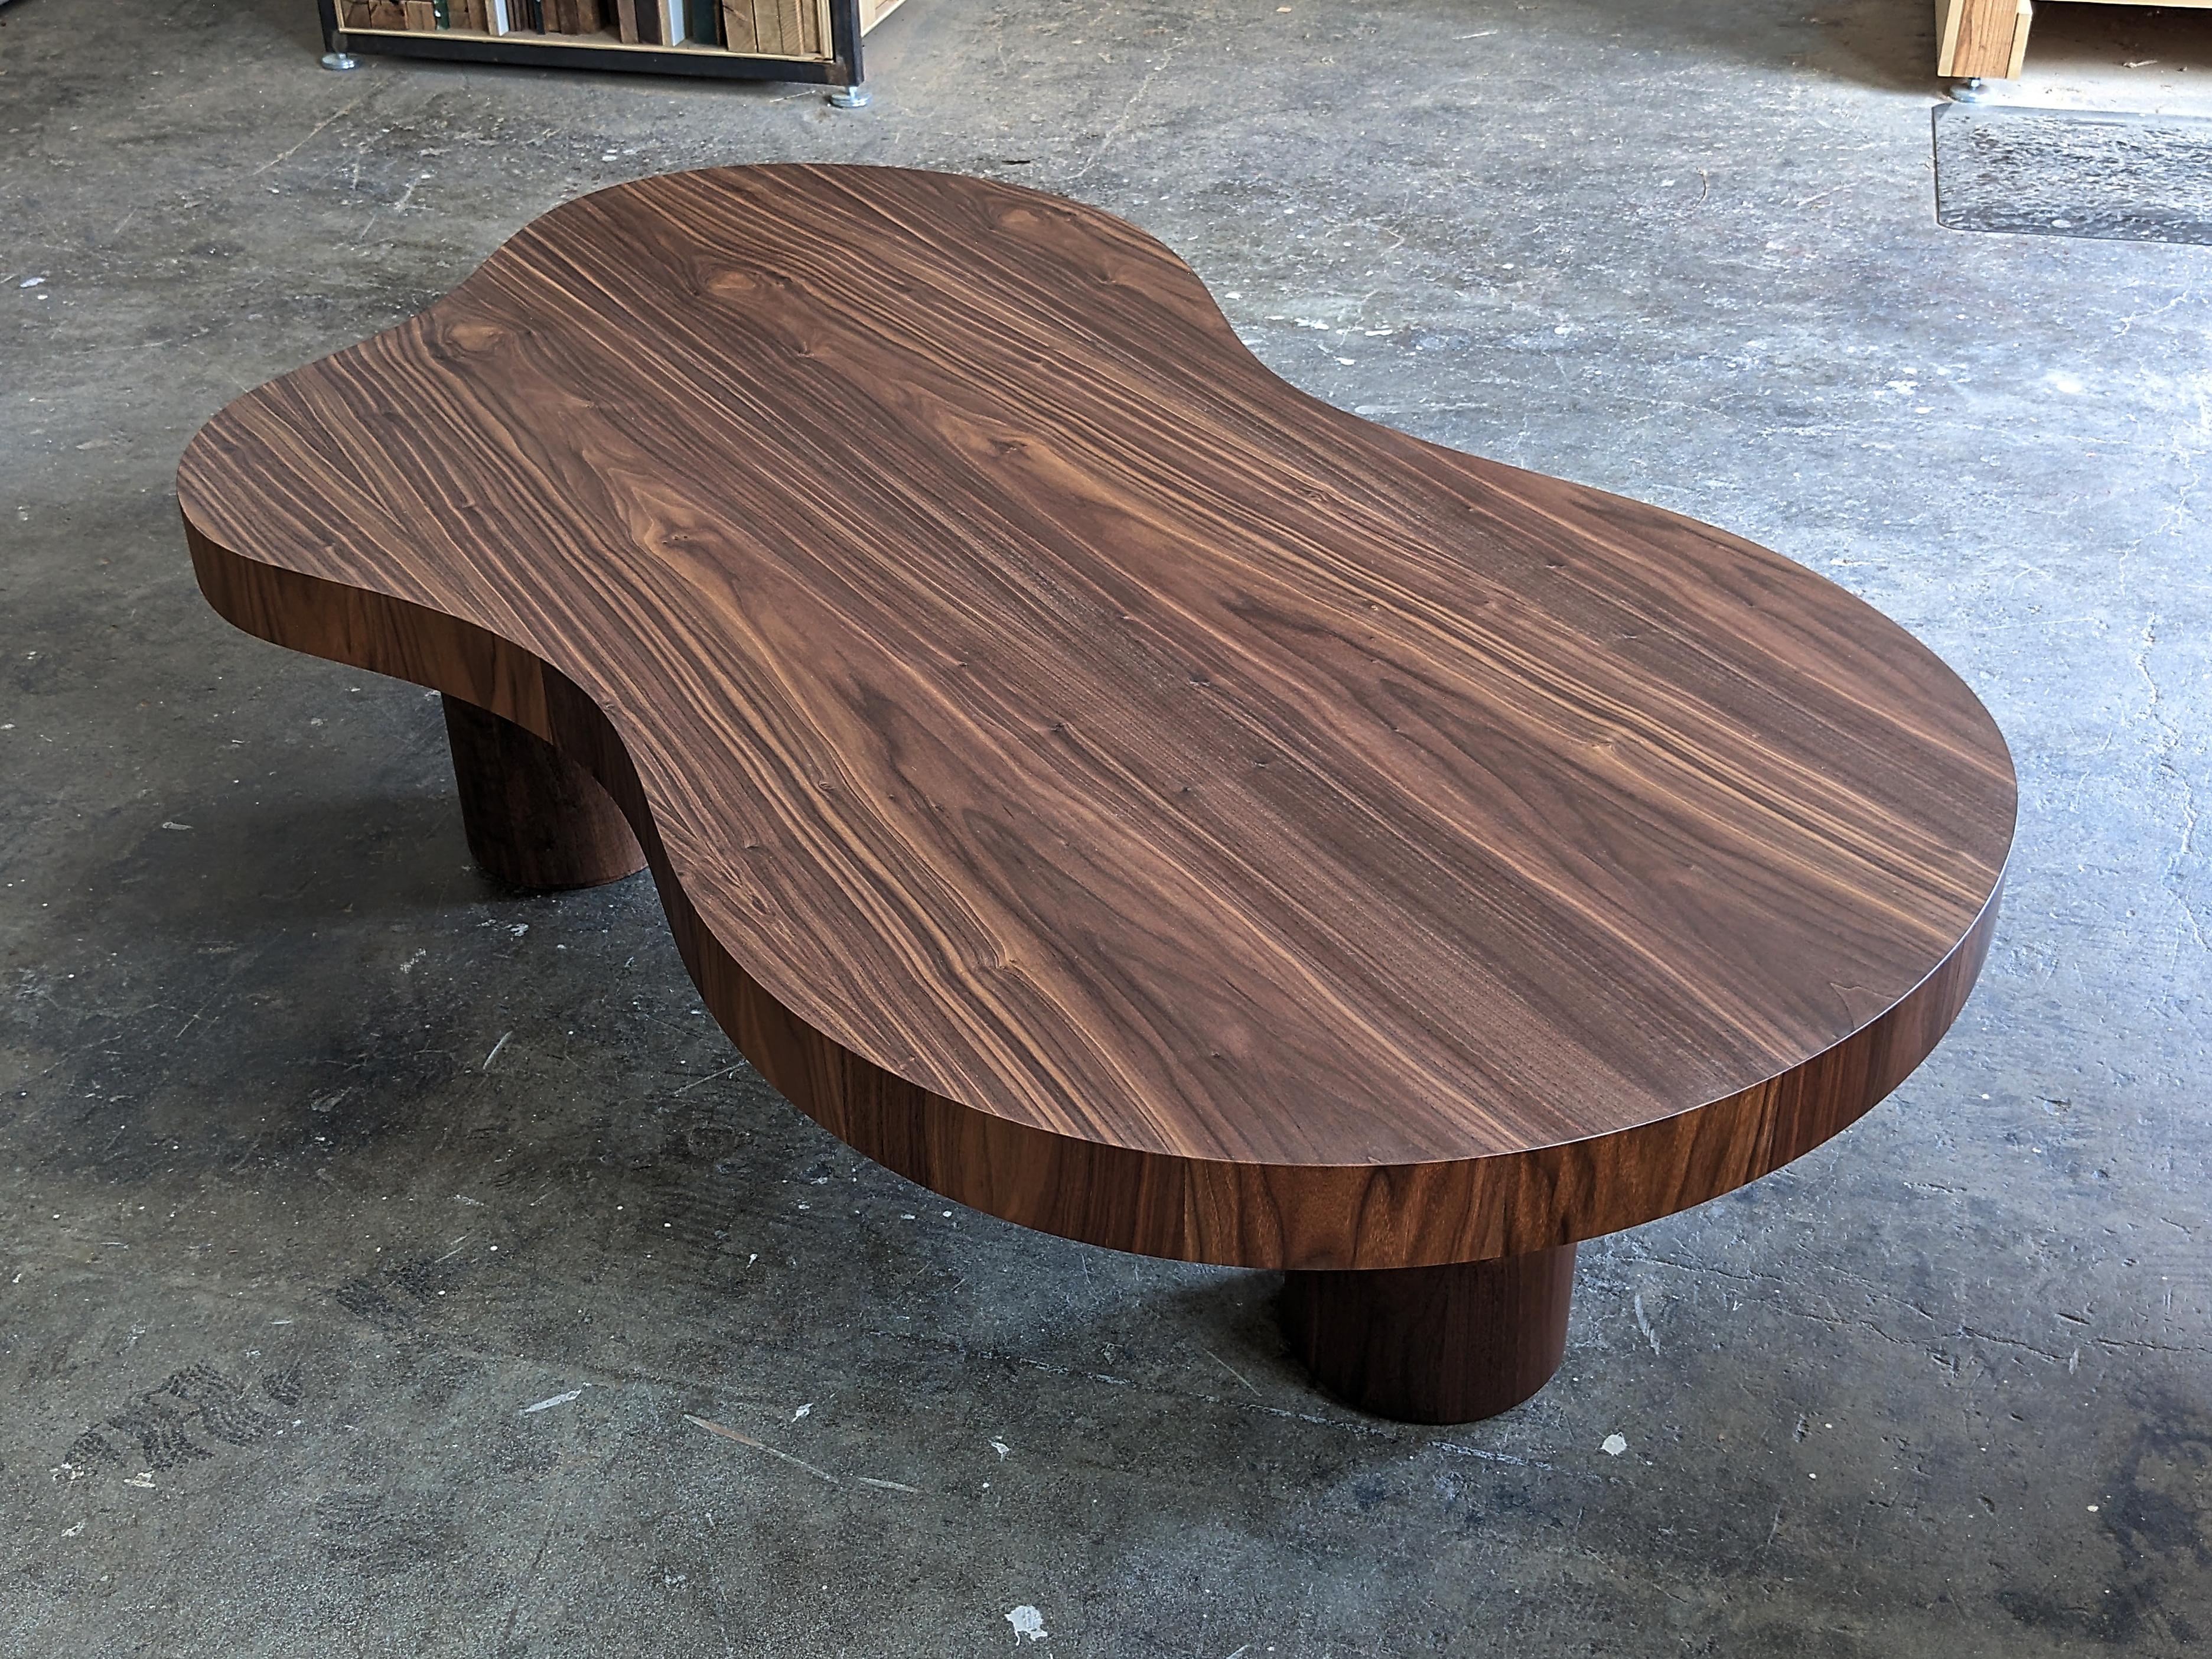 Freeform Walnut coffee table based on the style of historical pieces of the 20th century. This coffee table features an irregularly curved tabletop with vertical grain thick-veneered perimeter. Three turned solid Walnut legs support the thick